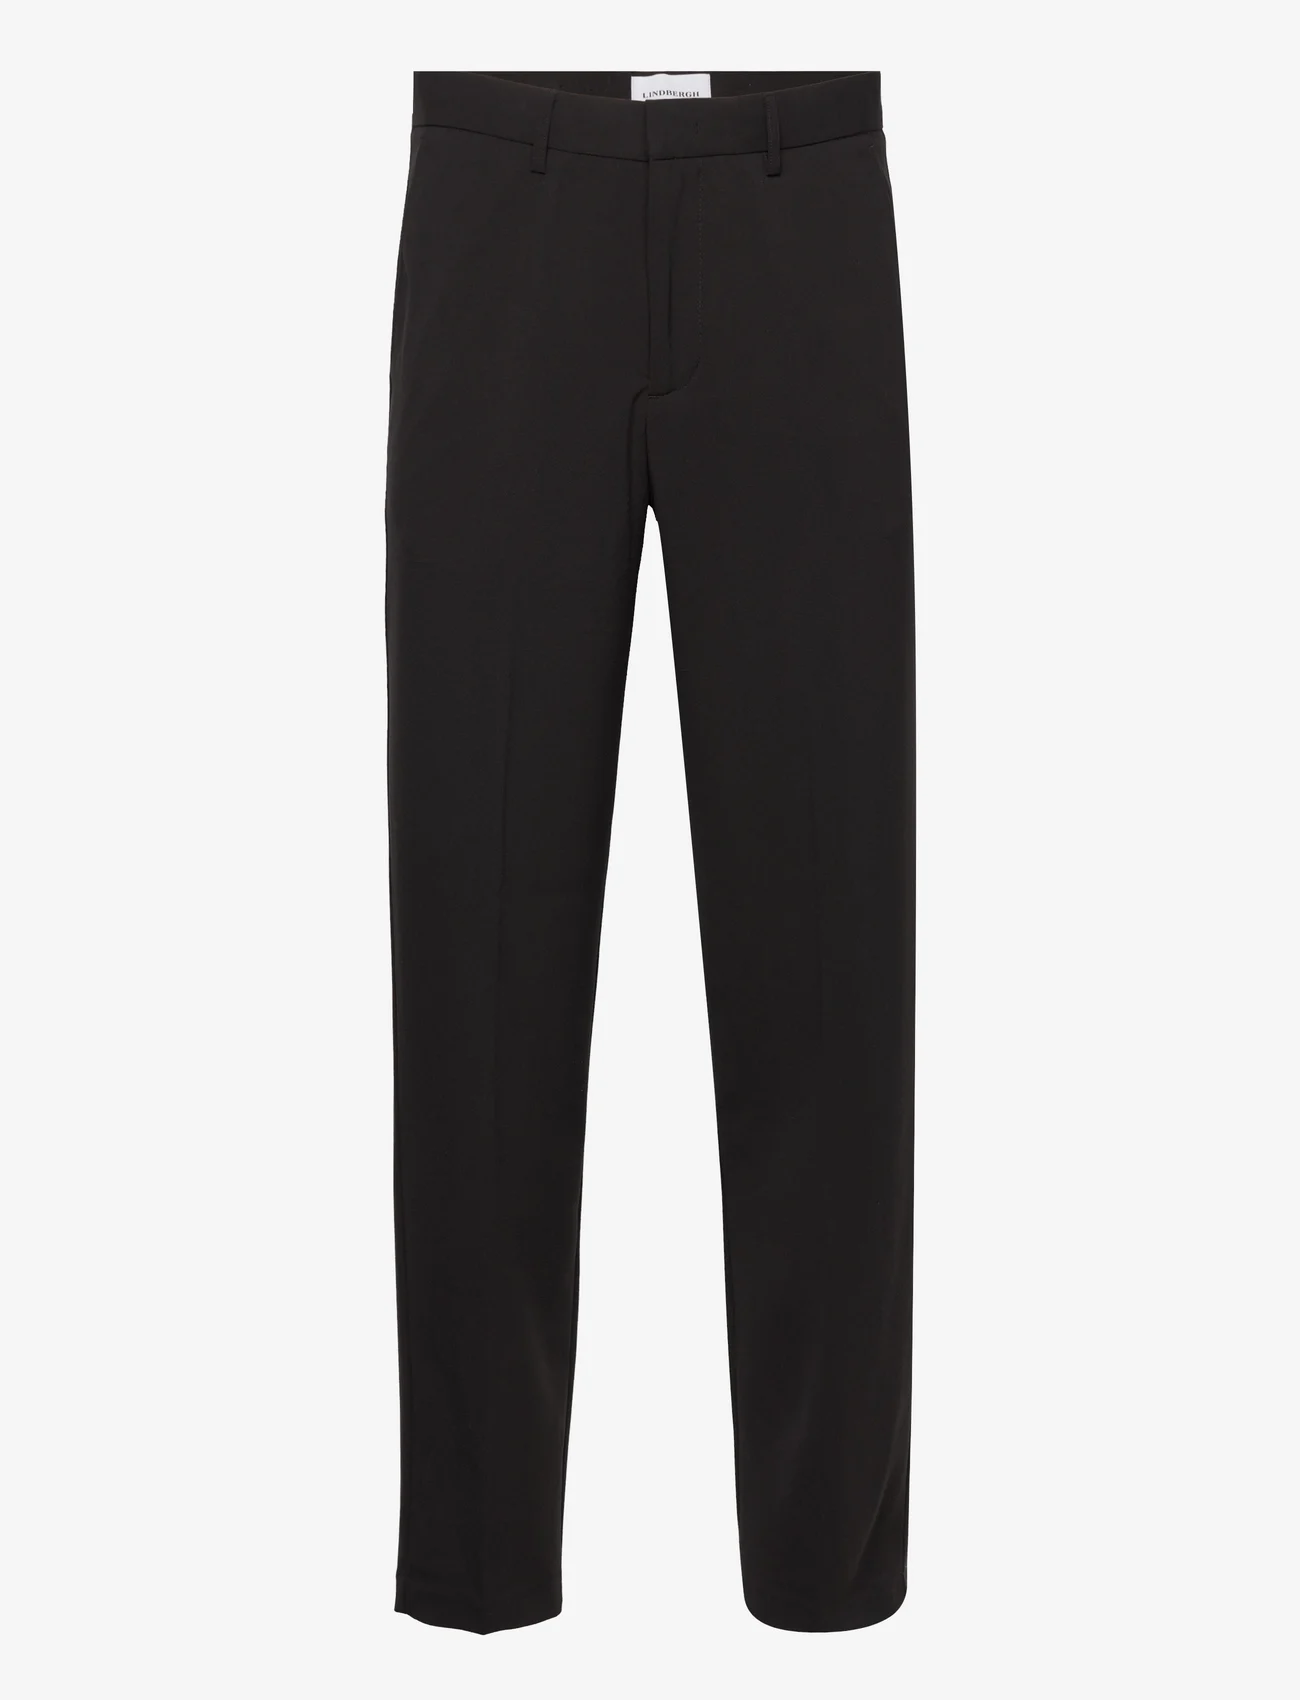 Lindbergh - Relaxed fit formal pants - suit trousers - black - 0